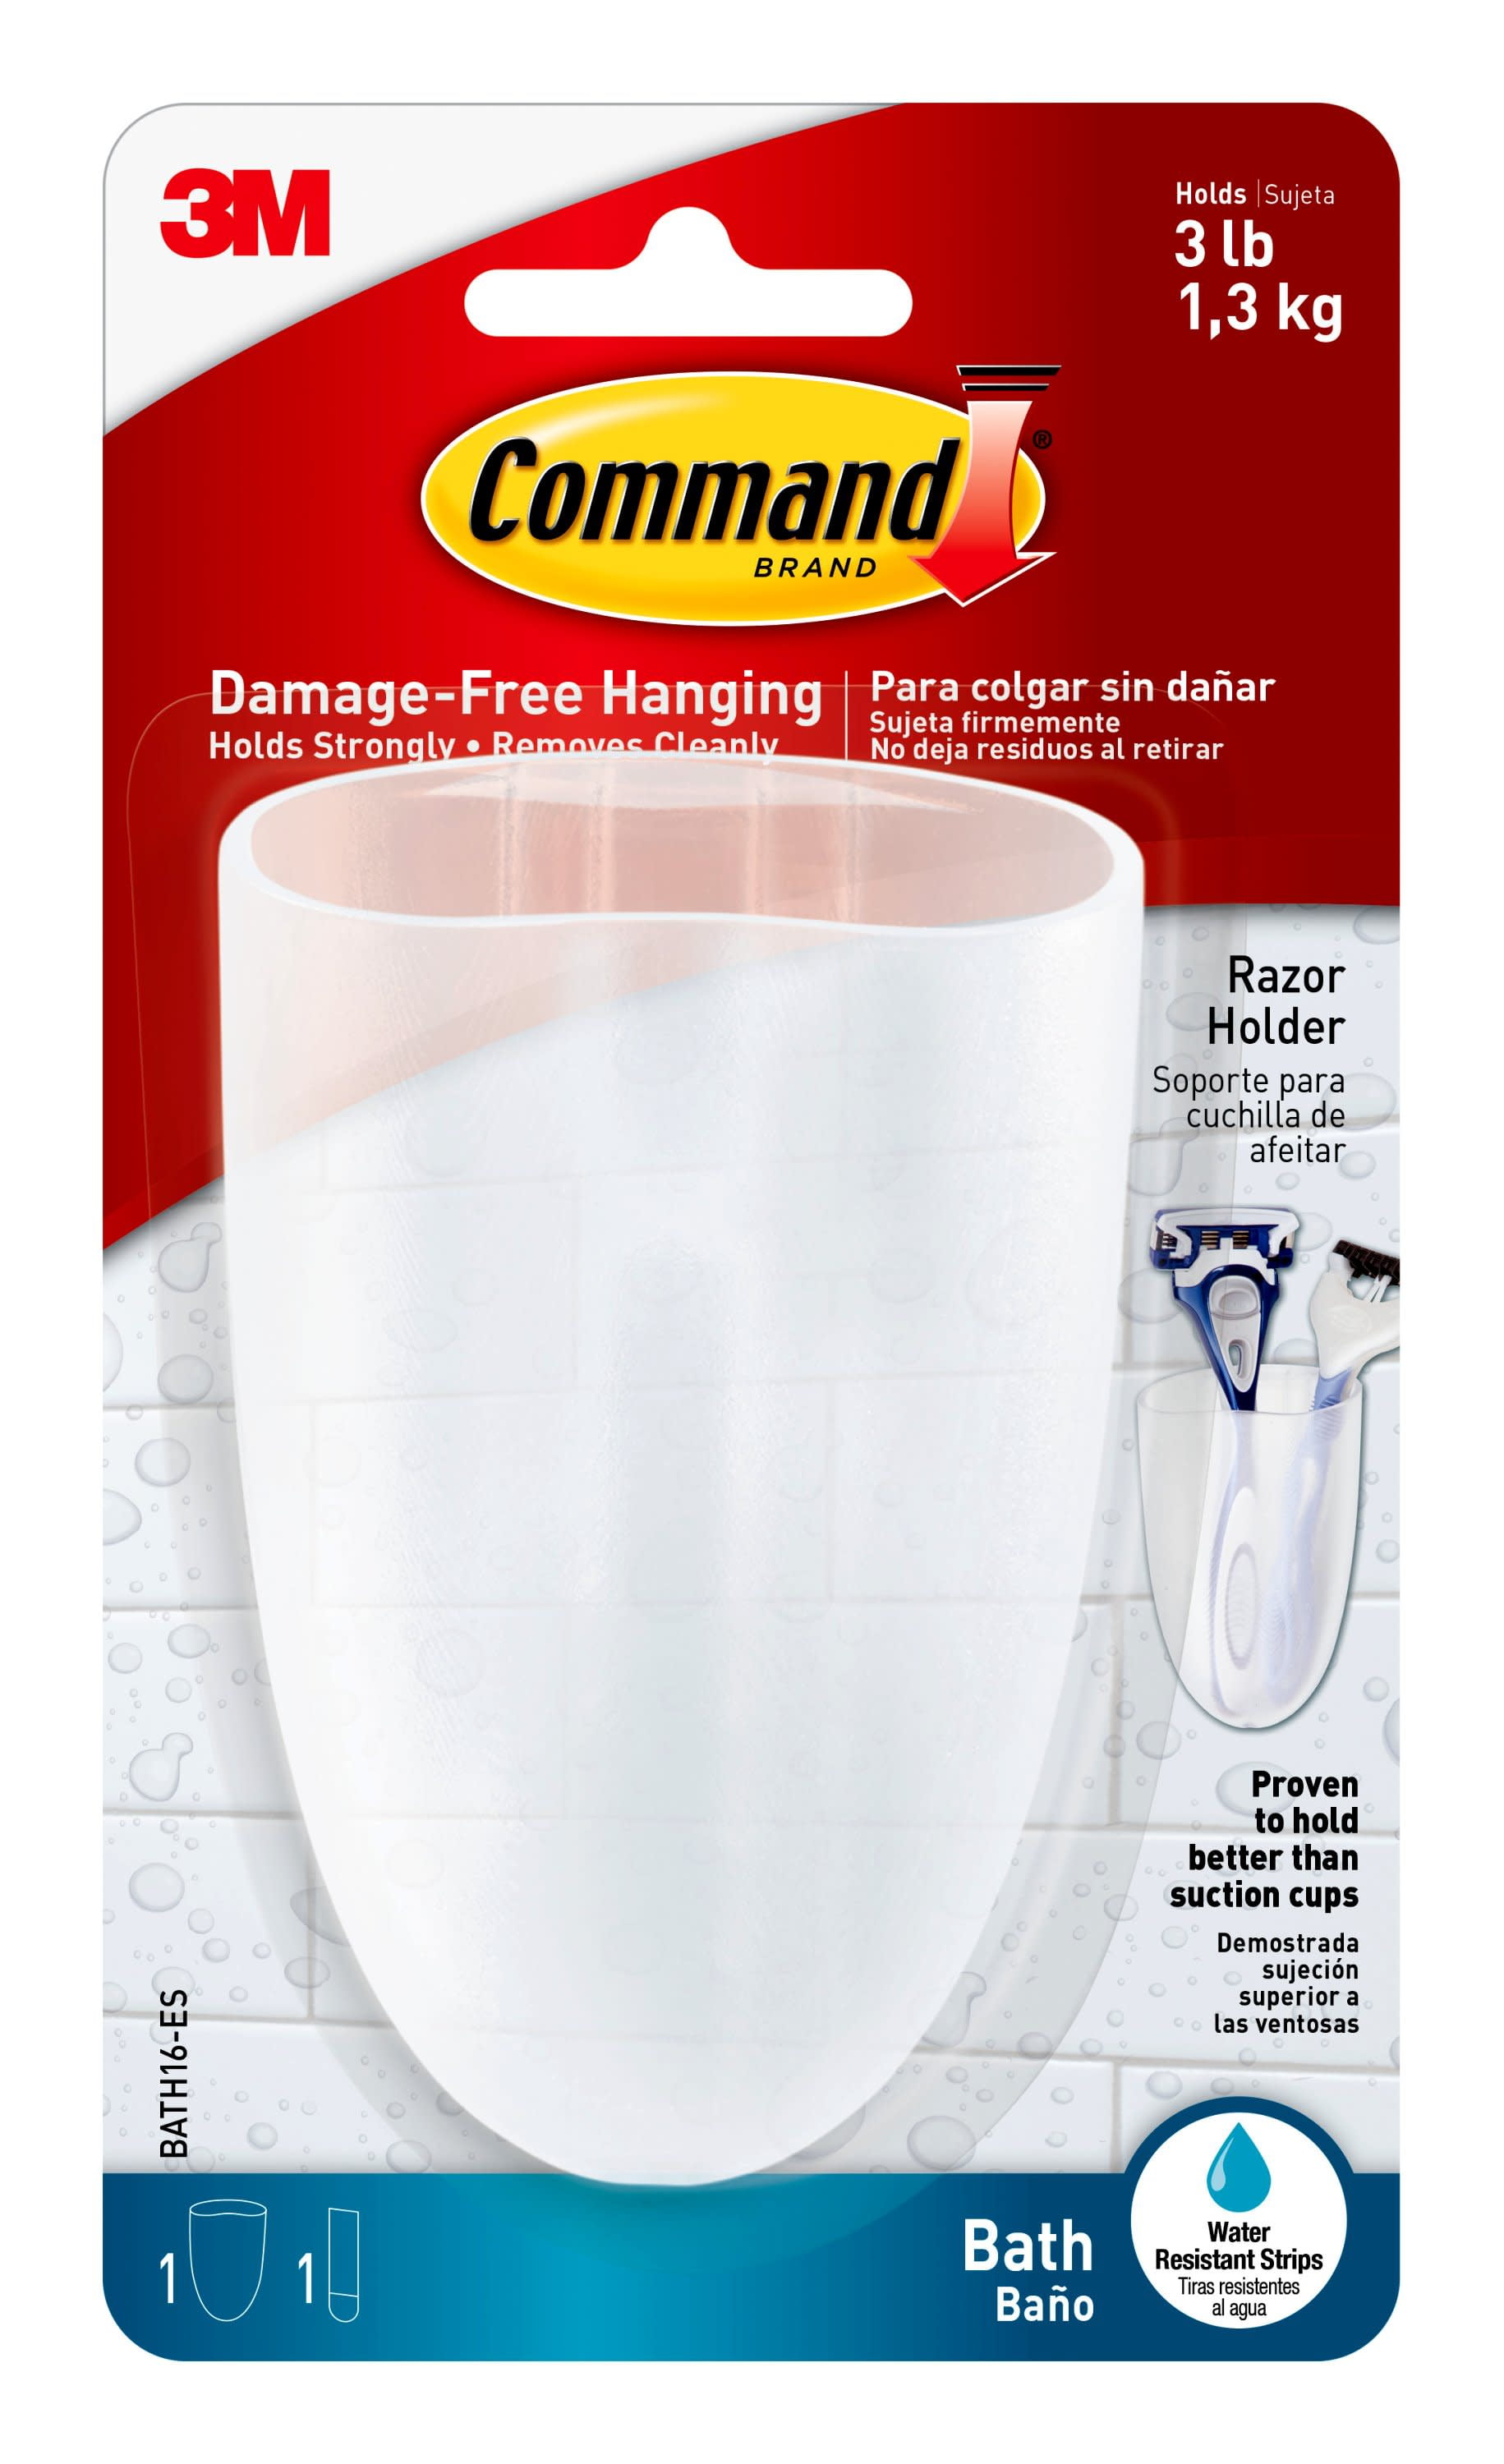 Frosted 3M BATH14 Command Soap Dish Bath Adhesive Damage Free Hanging Plastic 